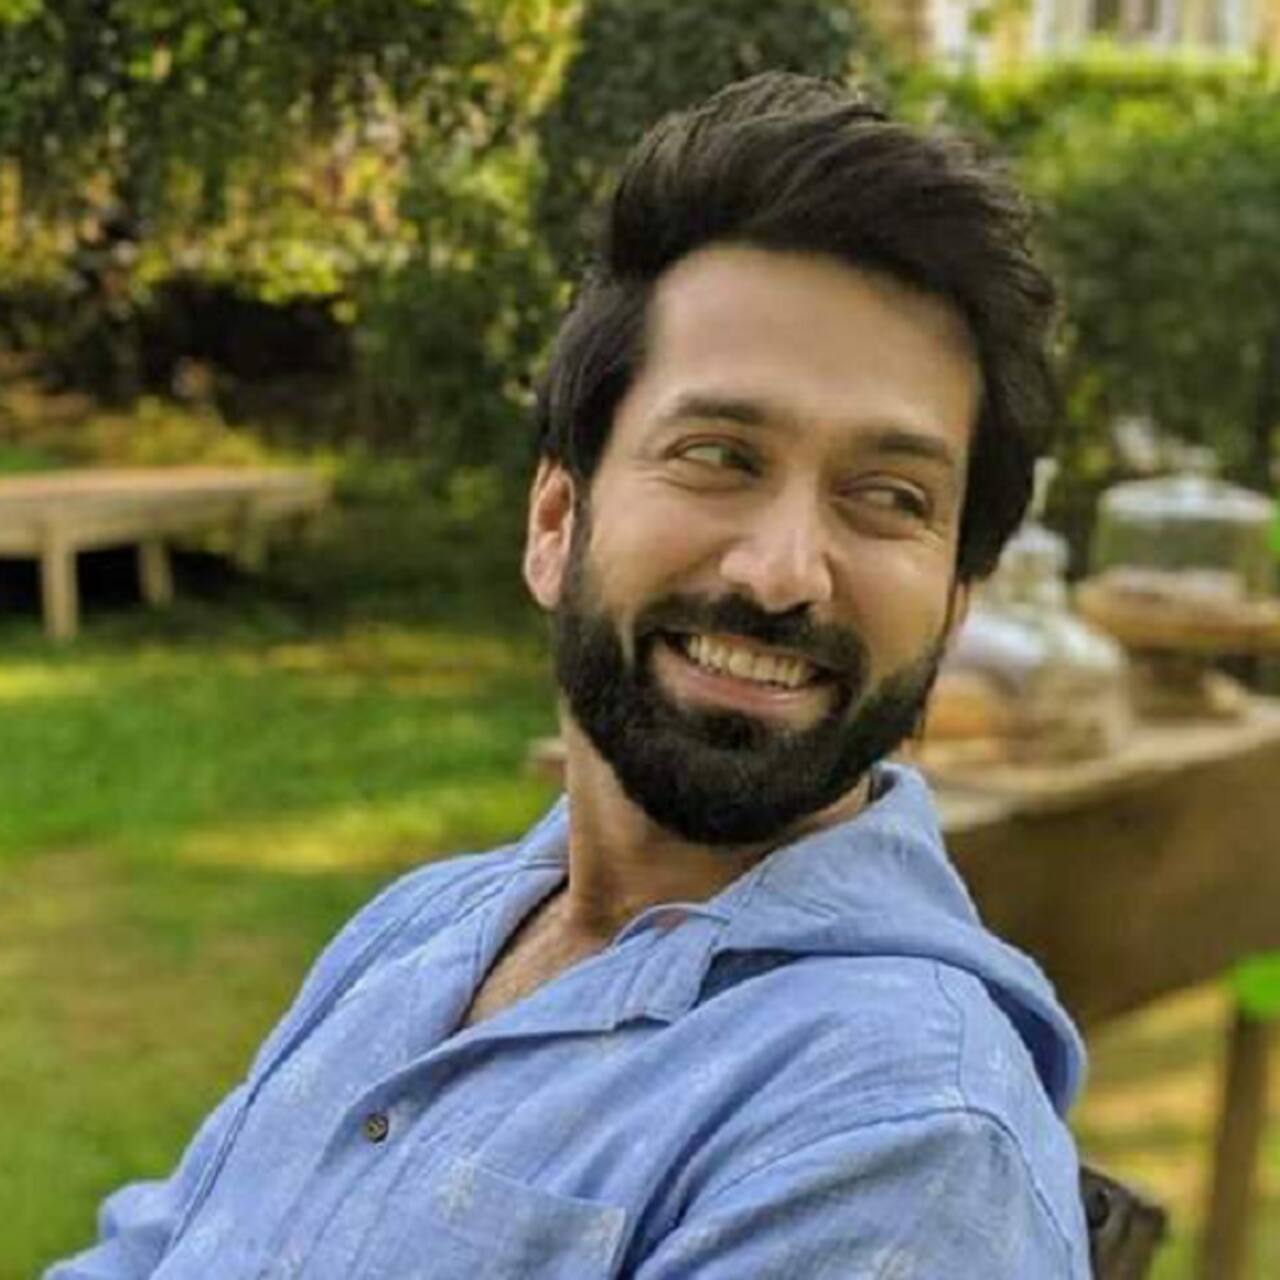 Bade Achhe Lagte Hain 2 star Nakuul Mehta asks Pakistanis to not break TV screens after losing against India; don't miss their reactions